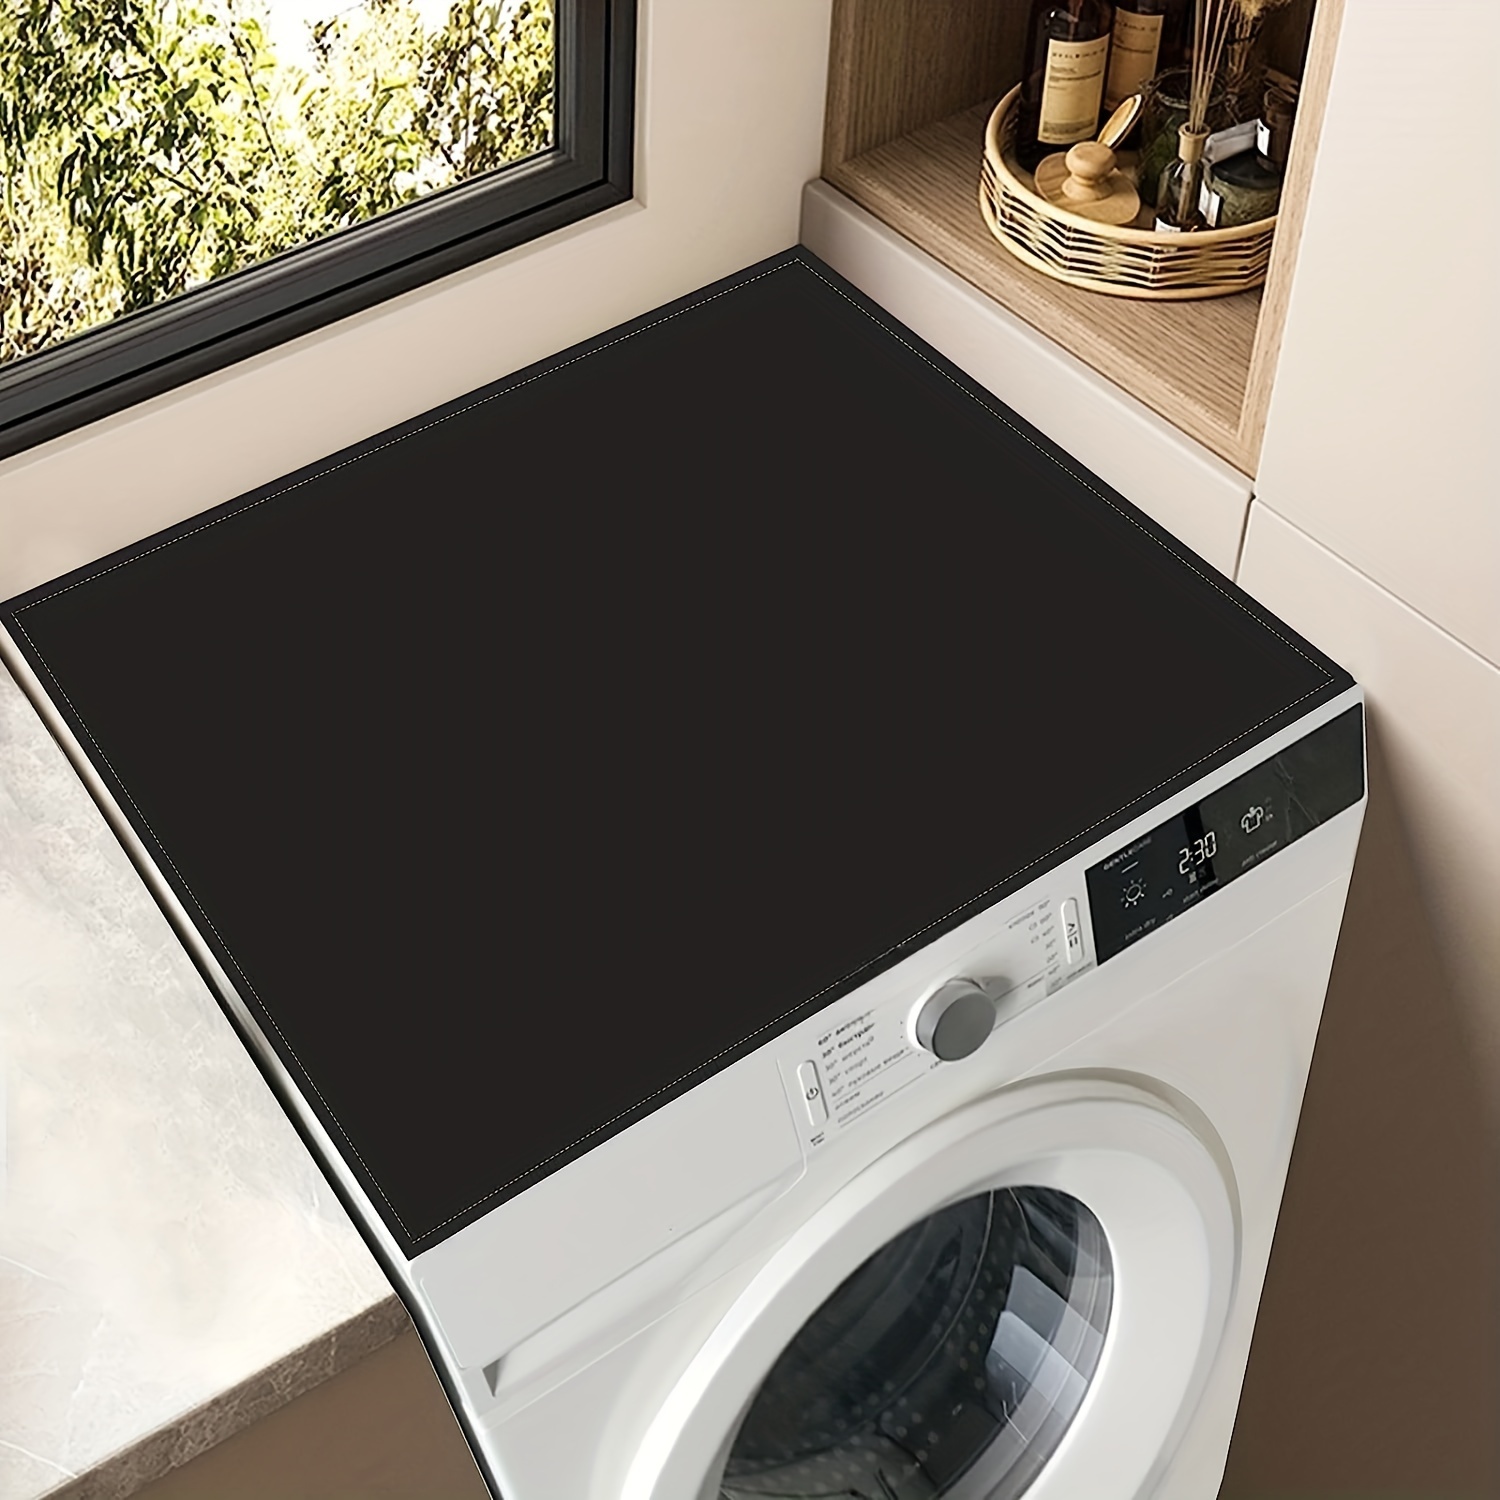 Anti-Slip Washer or Dryer Top Mat Covers 23 6 x Black Washing Machine Protector Dust-proof Cover for Home Laundry Room Kitchen at MechanicSurplus.com